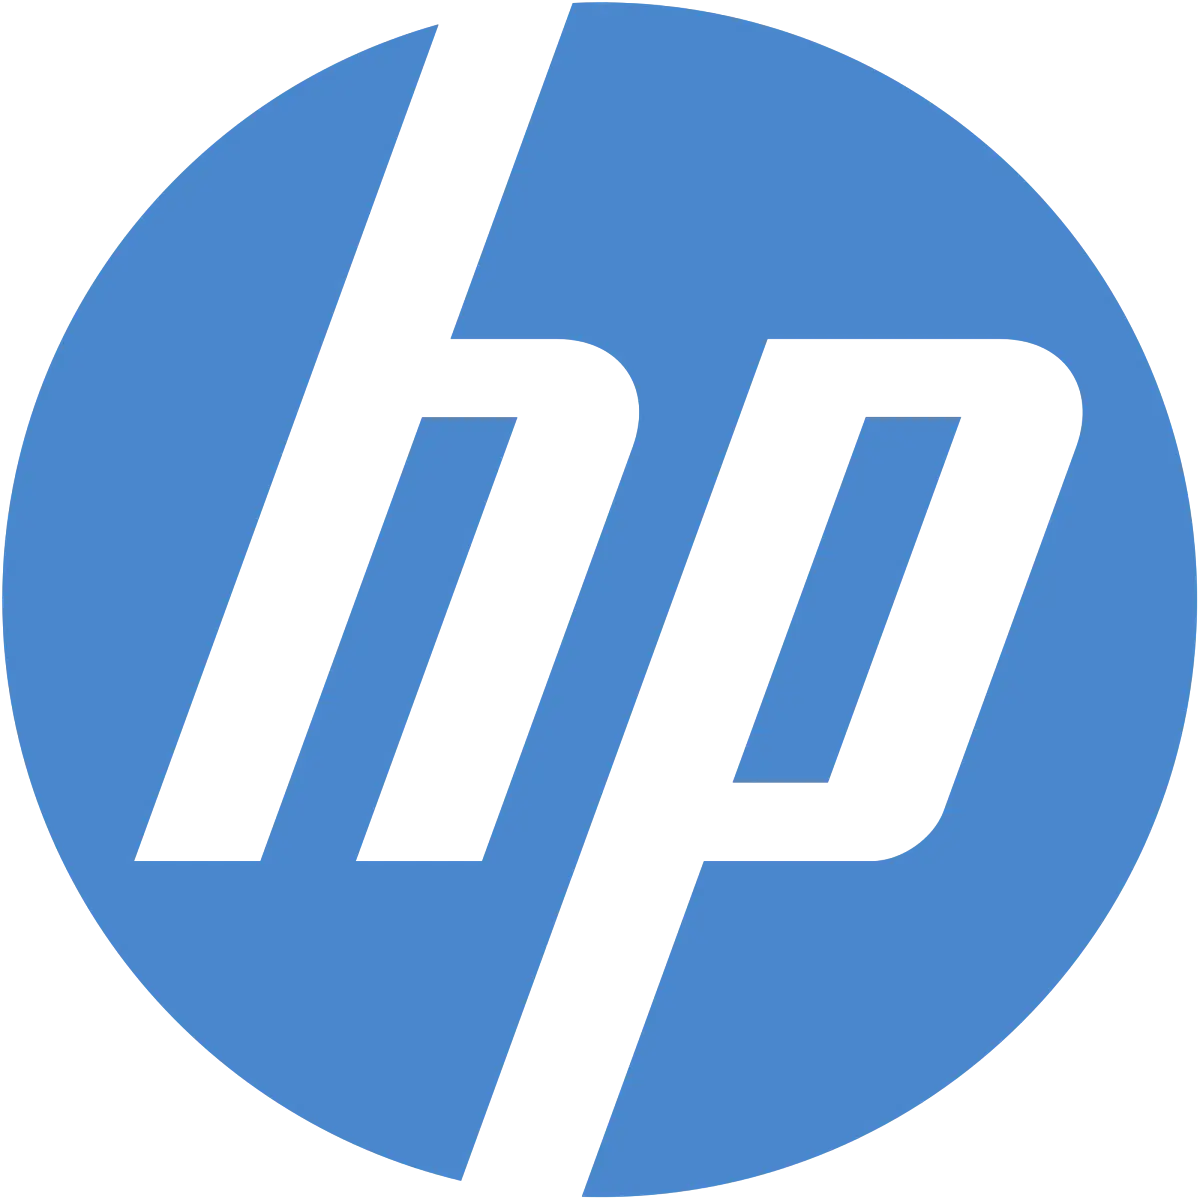 Hewlett packard distributors in india: expanding manufacturing and local presence